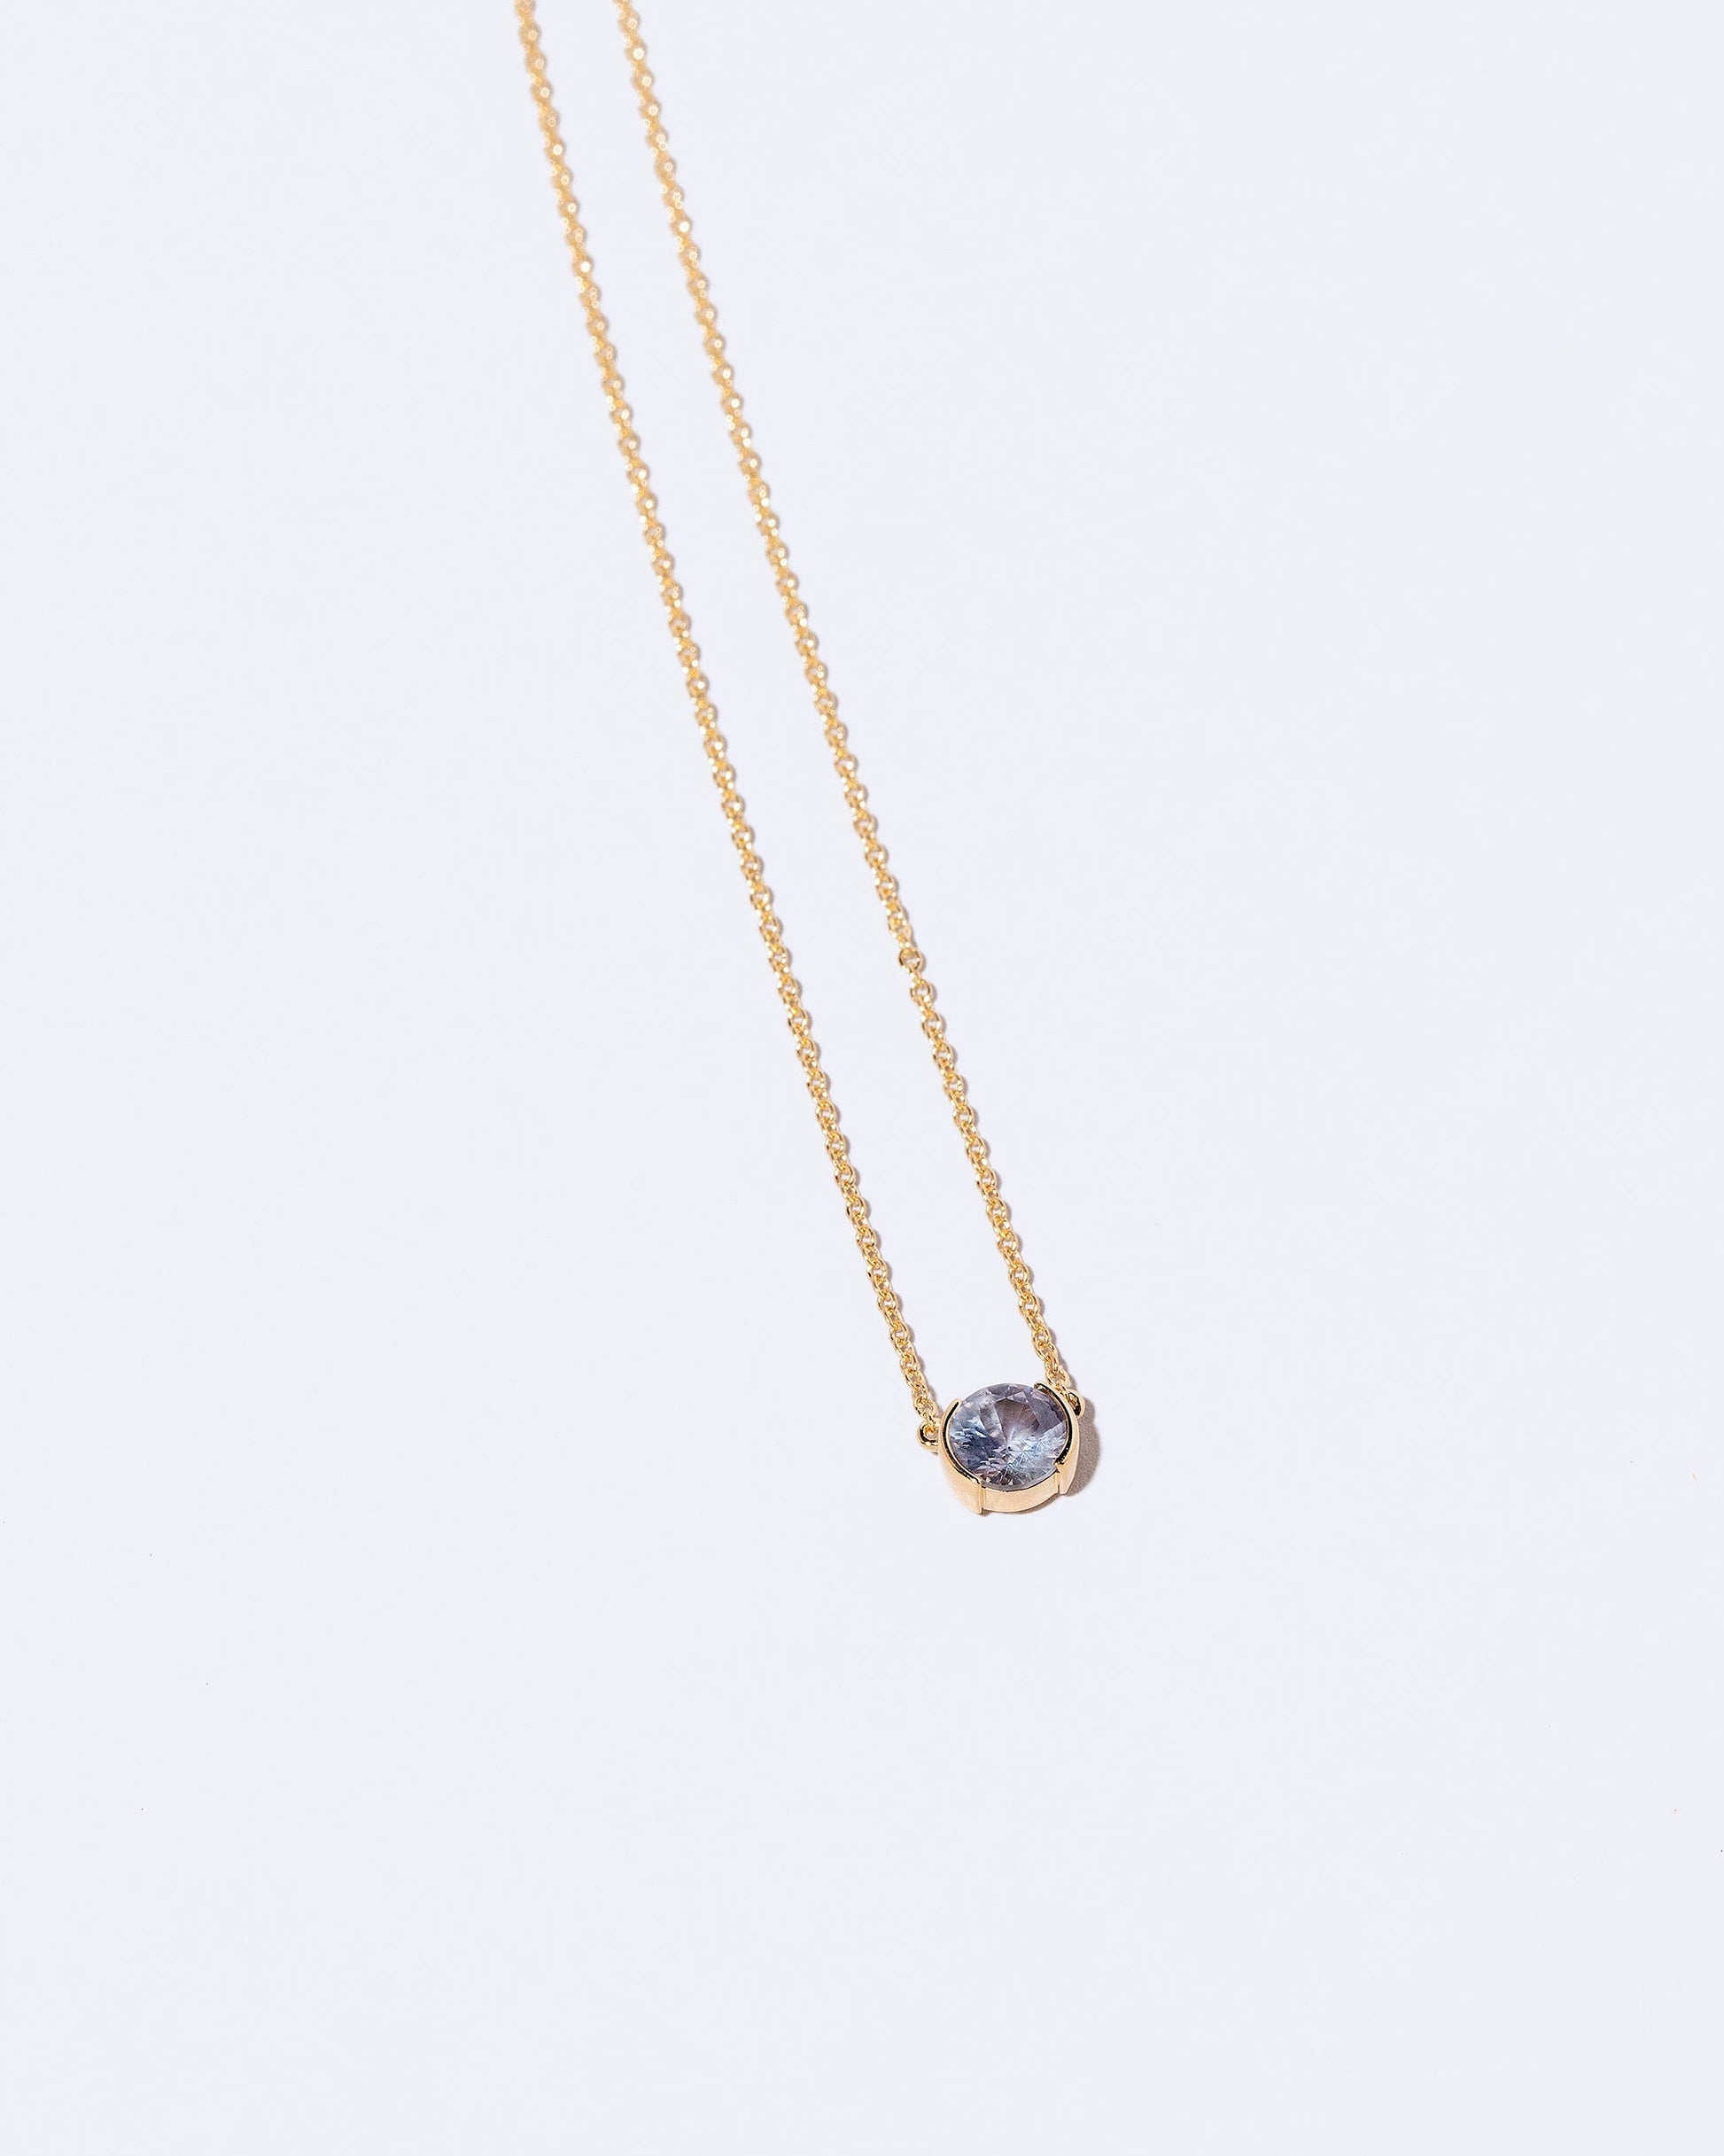  Occam's Necklace on light color background.